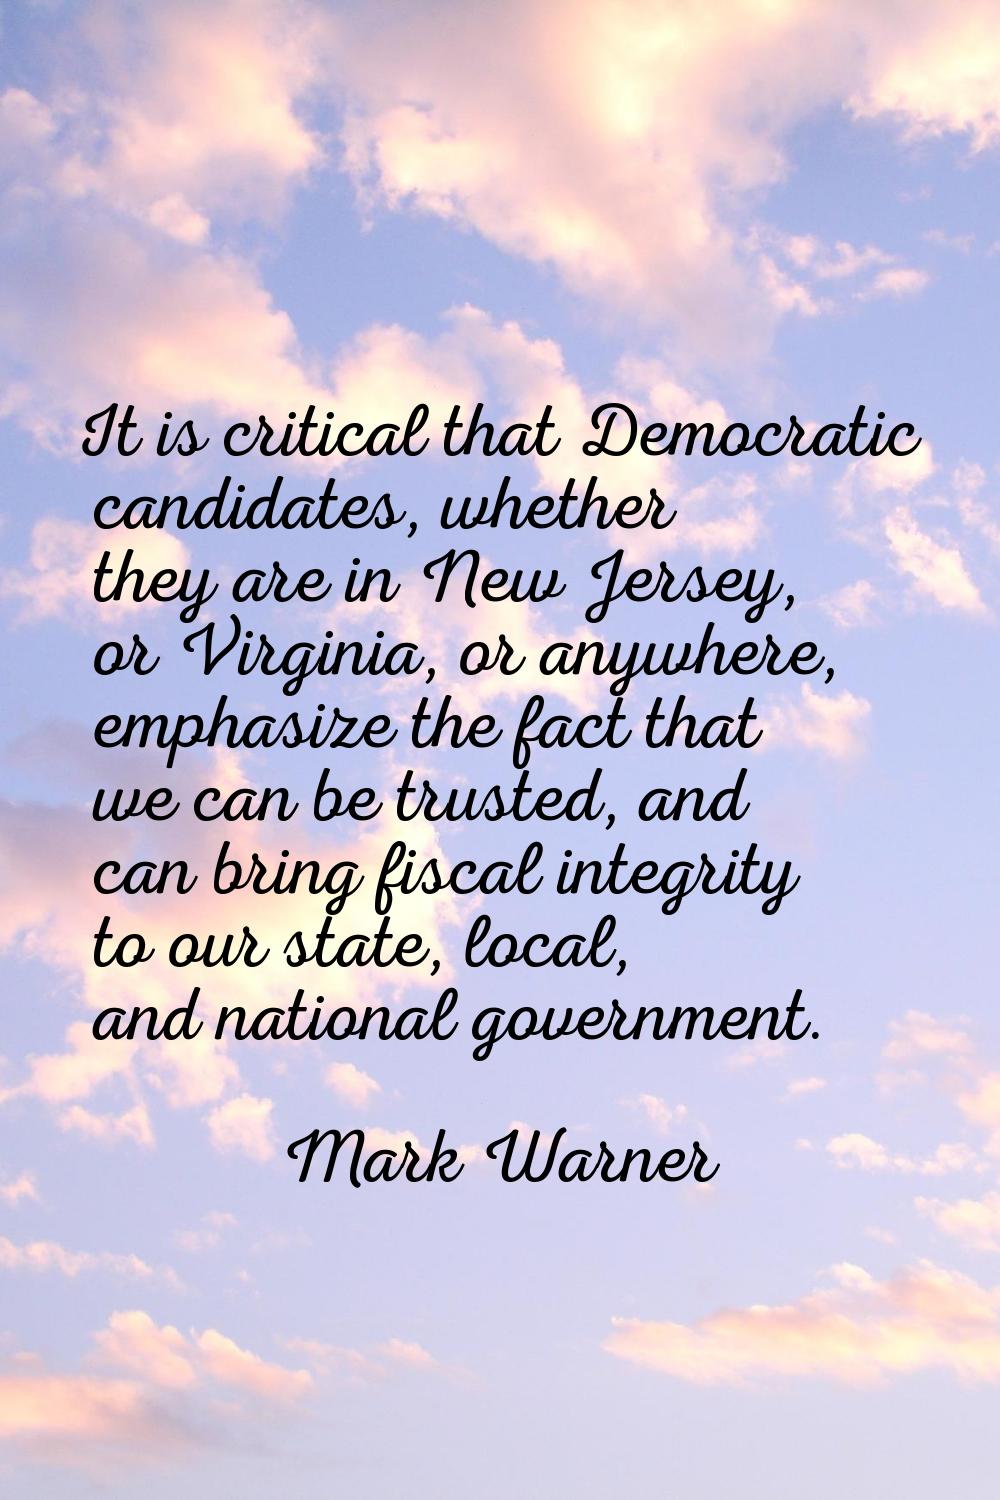 It is critical that Democratic candidates, whether they are in New Jersey, or Virginia, or anywhere